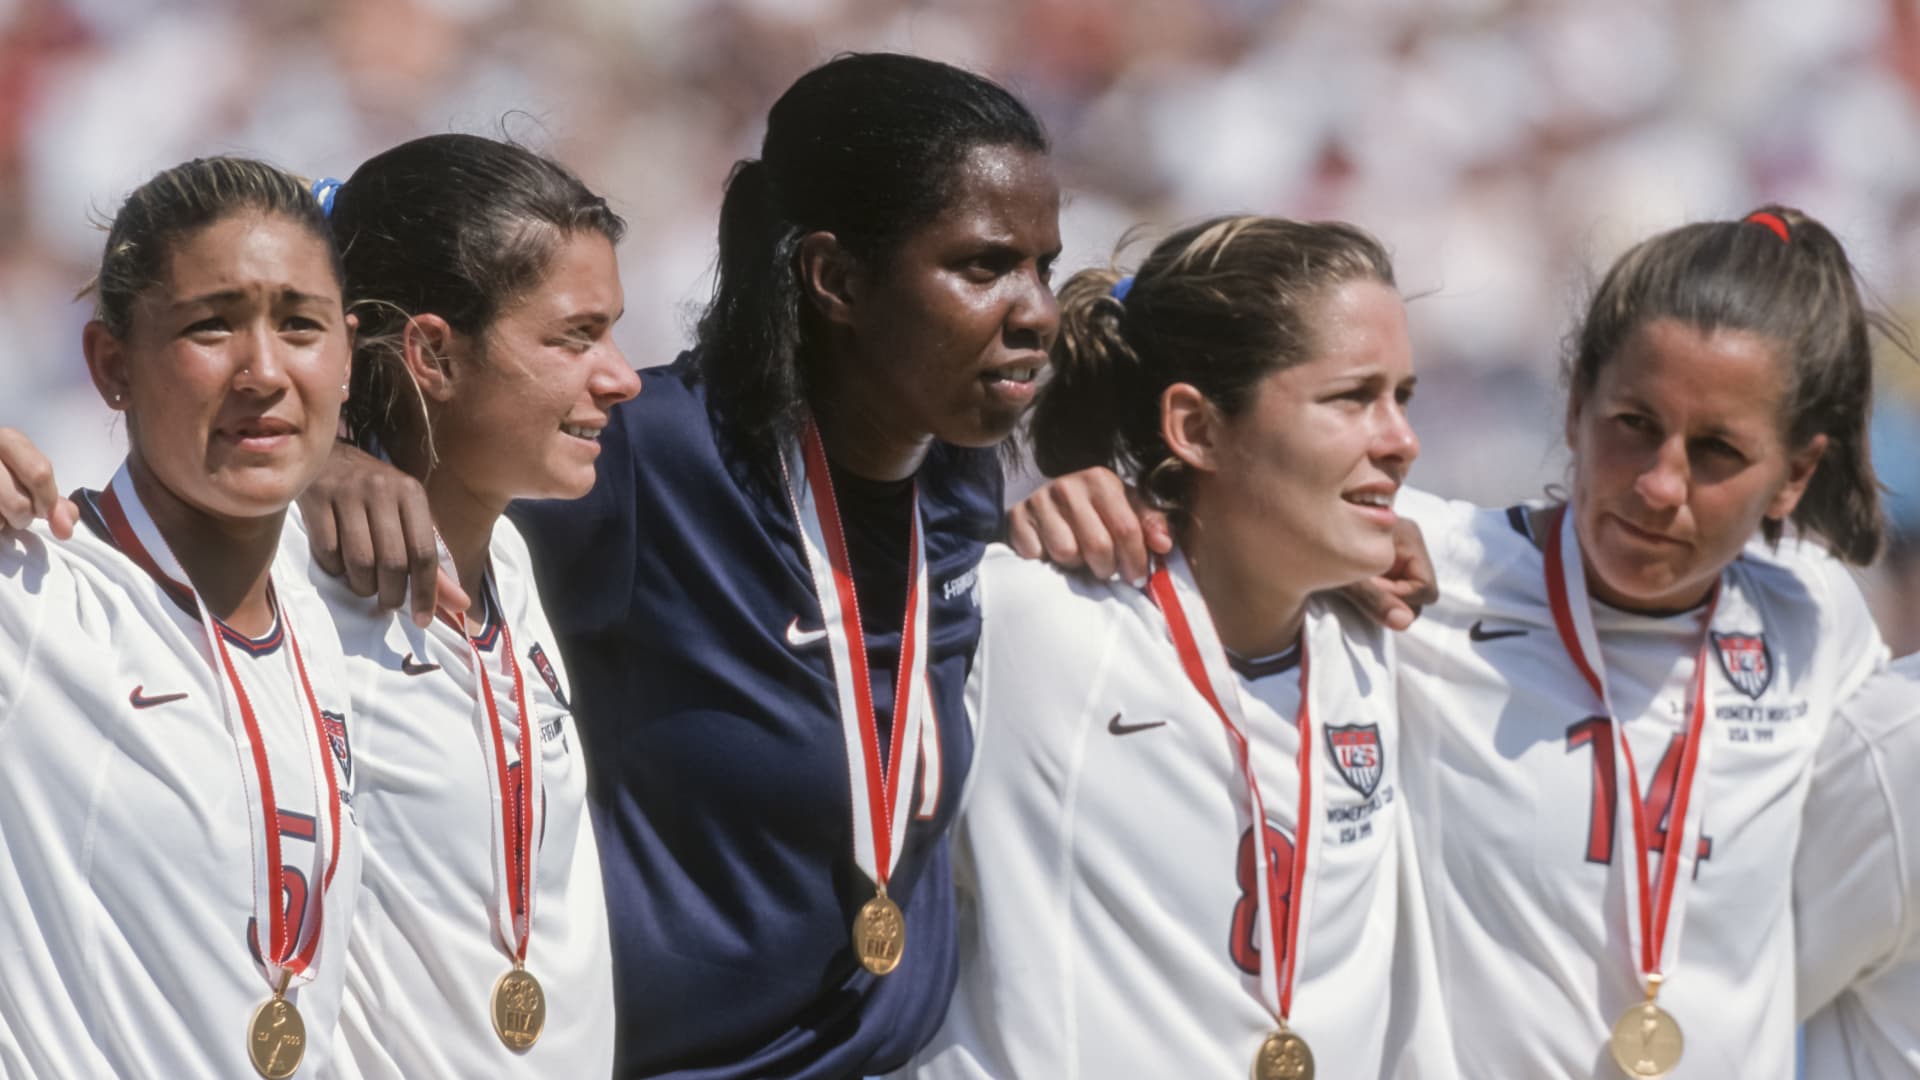 PASADENA, CA - JULY 10: Tiffany Roberts #5, Mia Hamm #9, Briana Scurry #1, Shannon MacMillan #8, and Joy Fawcett #14 of the USA celebrate winning the 1999 FIFA Women's World Cup final played against China on July 10, 1999 at the Rose Bowl in Pasadena, California.